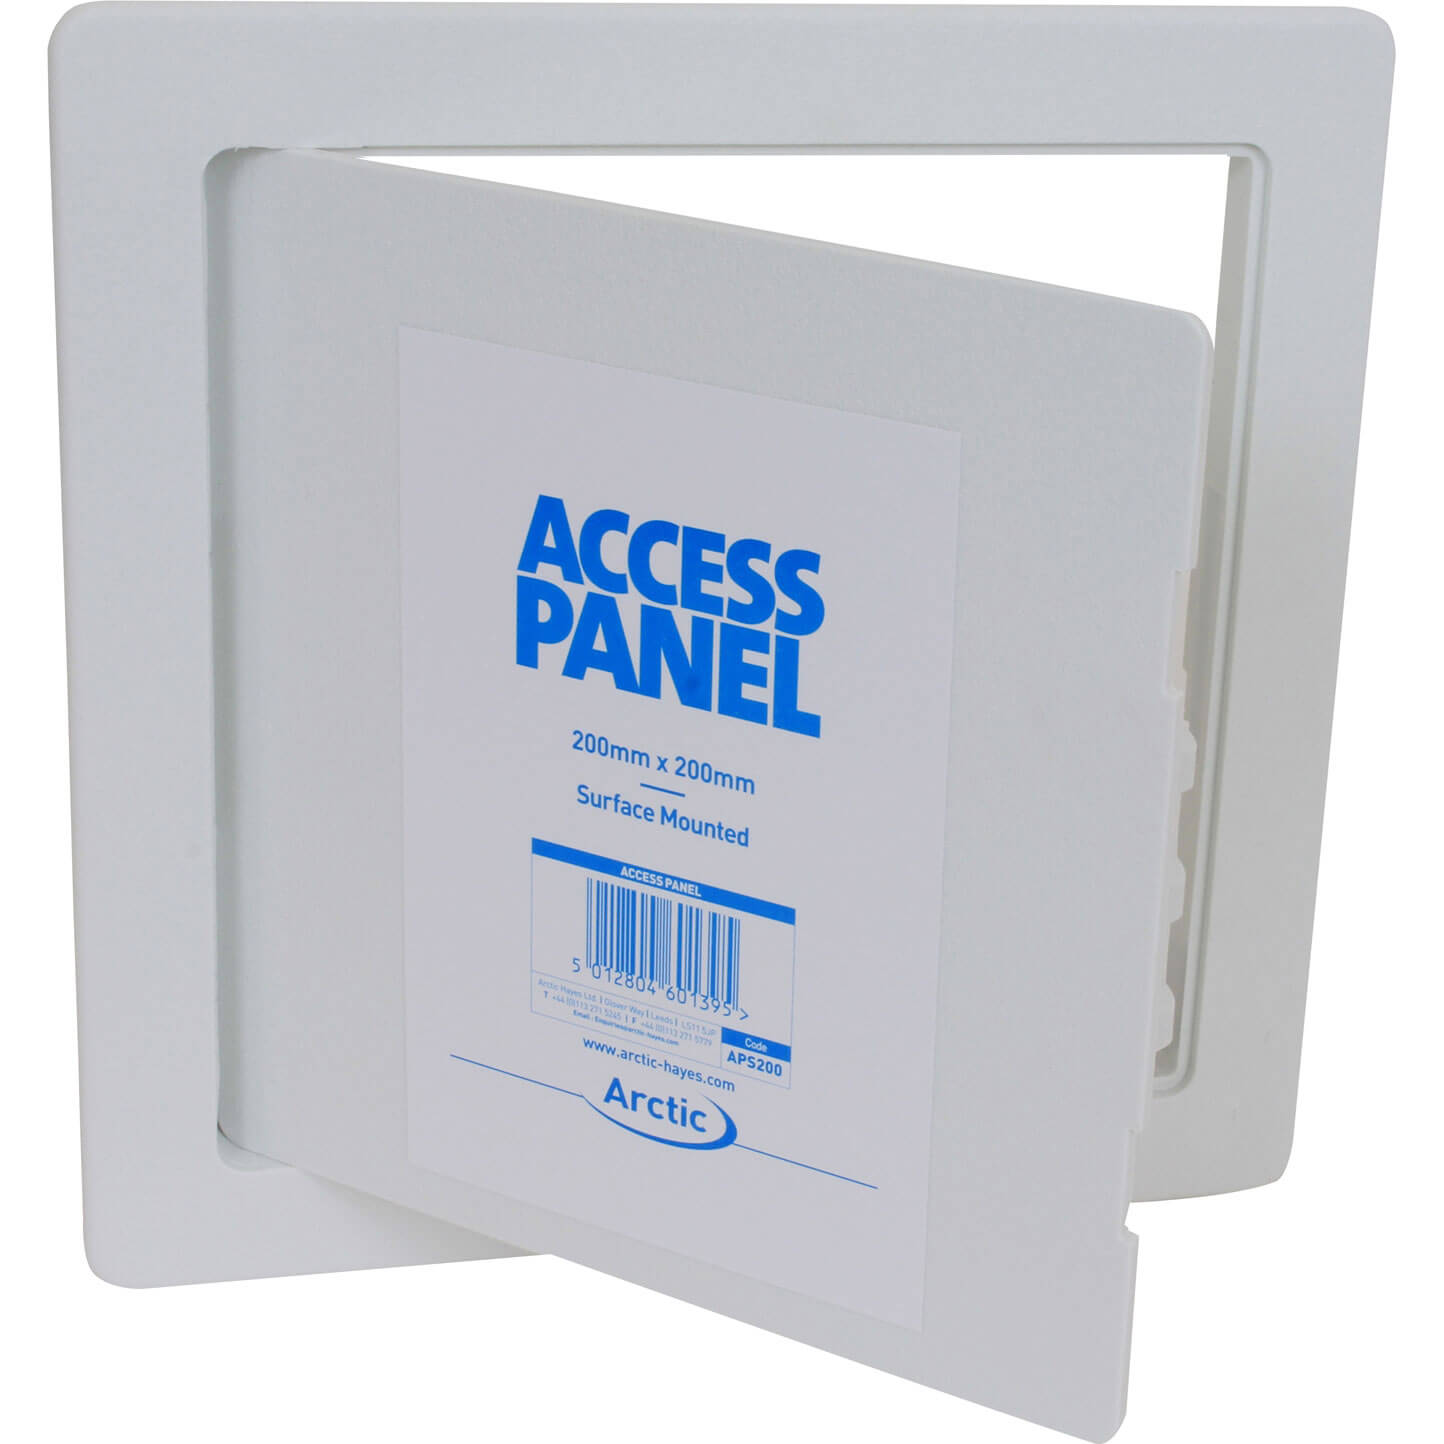 Photo of Arctic Hayes Access Panel 200mm 200mm